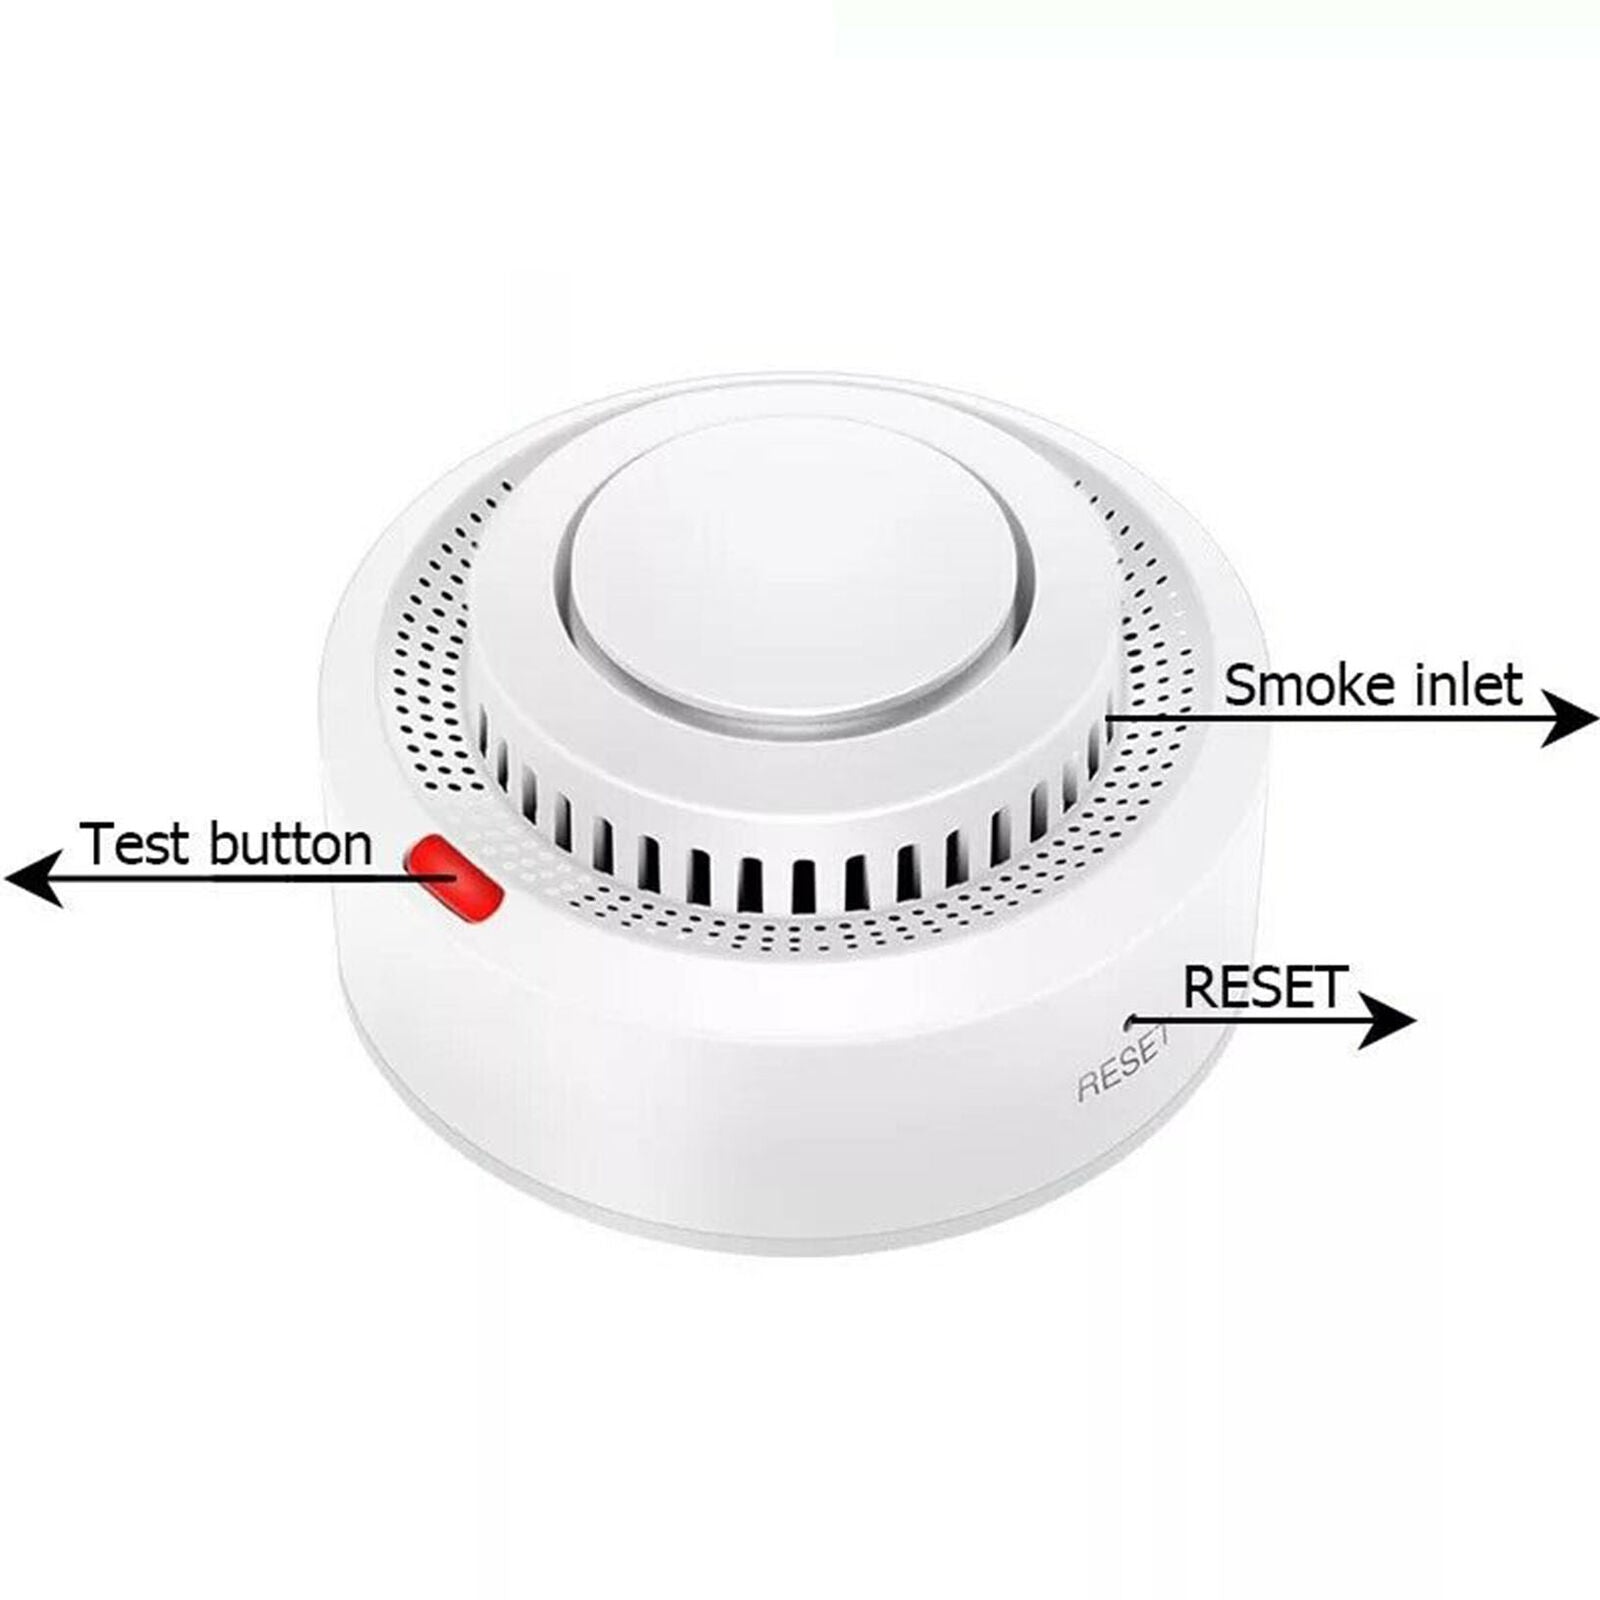 WiFi Alarm Fire Protection Detector house Combination Fire